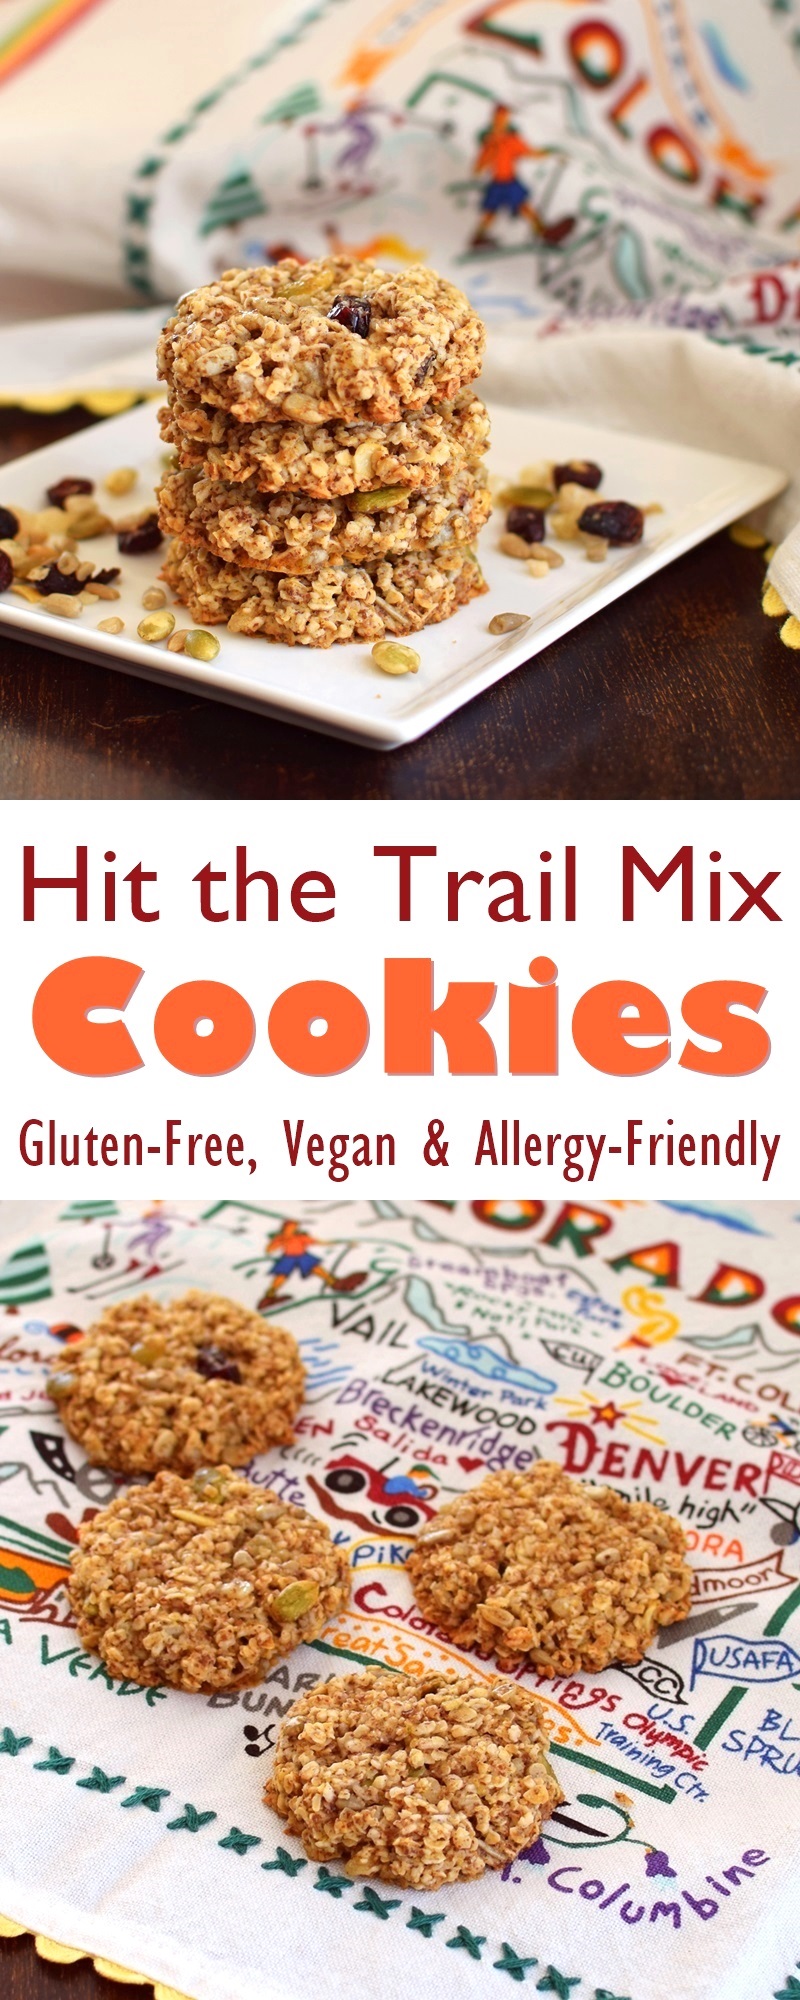 Trail Mix Cookies Recipe - naturally gluten-free, dairy-free, vegan, and allergy-friendly! A snack-worthy, breakfast-worthy treat